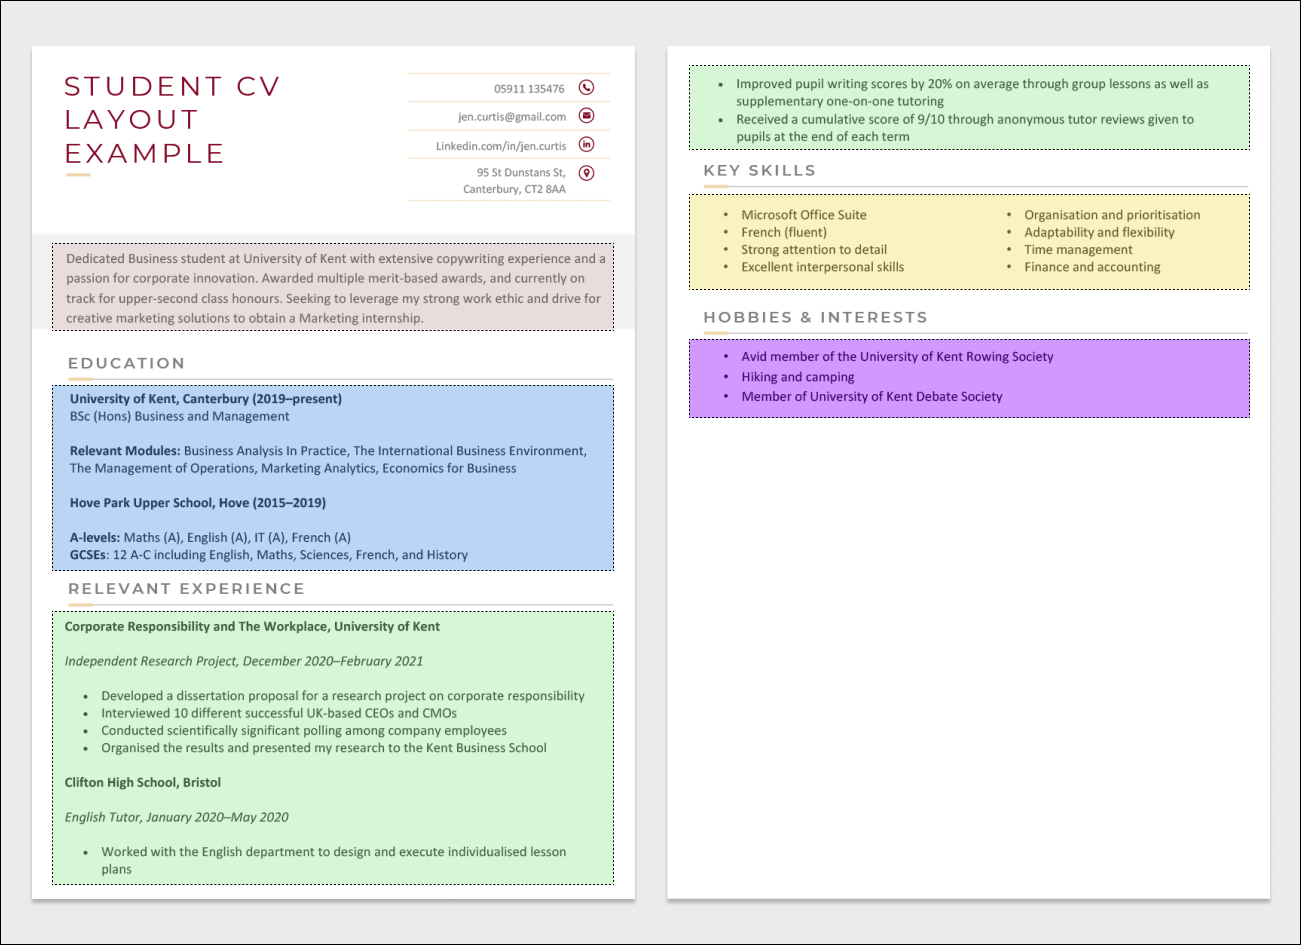 Two pages of a CV side-by-side on a light gray background to illustrate a student CV layout